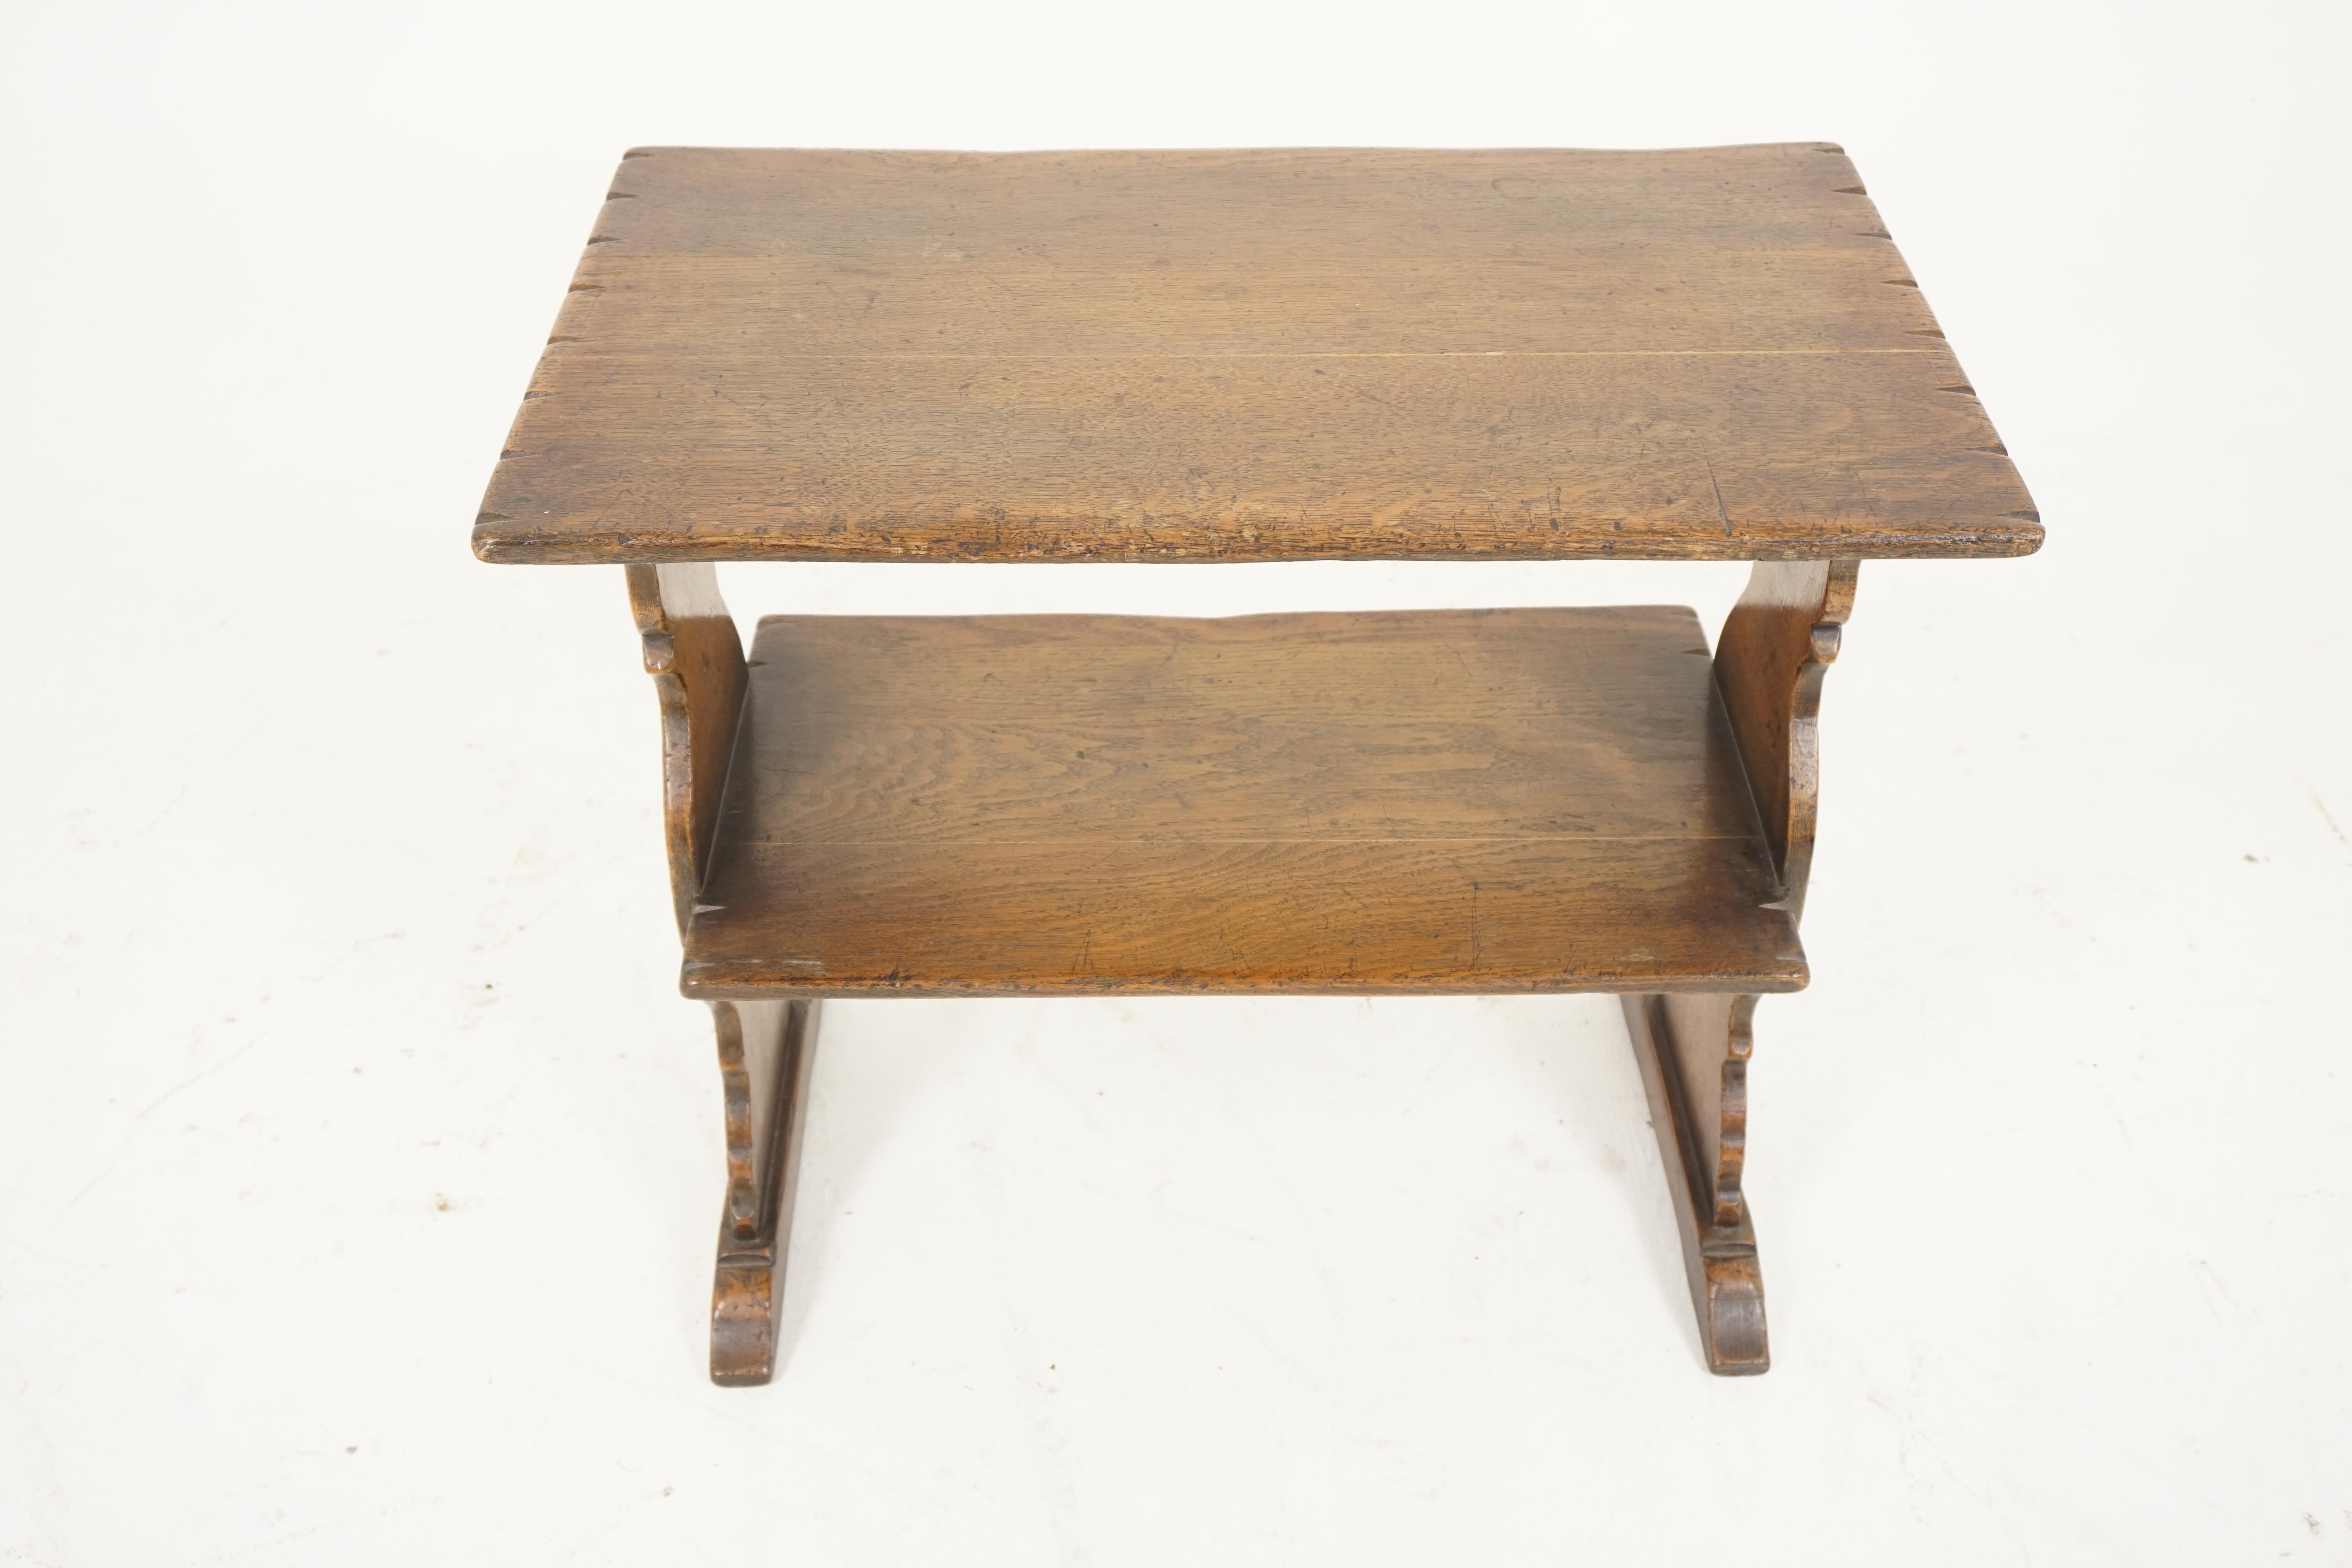 Hand-Crafted Vintage Oak Table, Two Tiered Bookstand, Antique Furniture, Scotland 1930, B1479